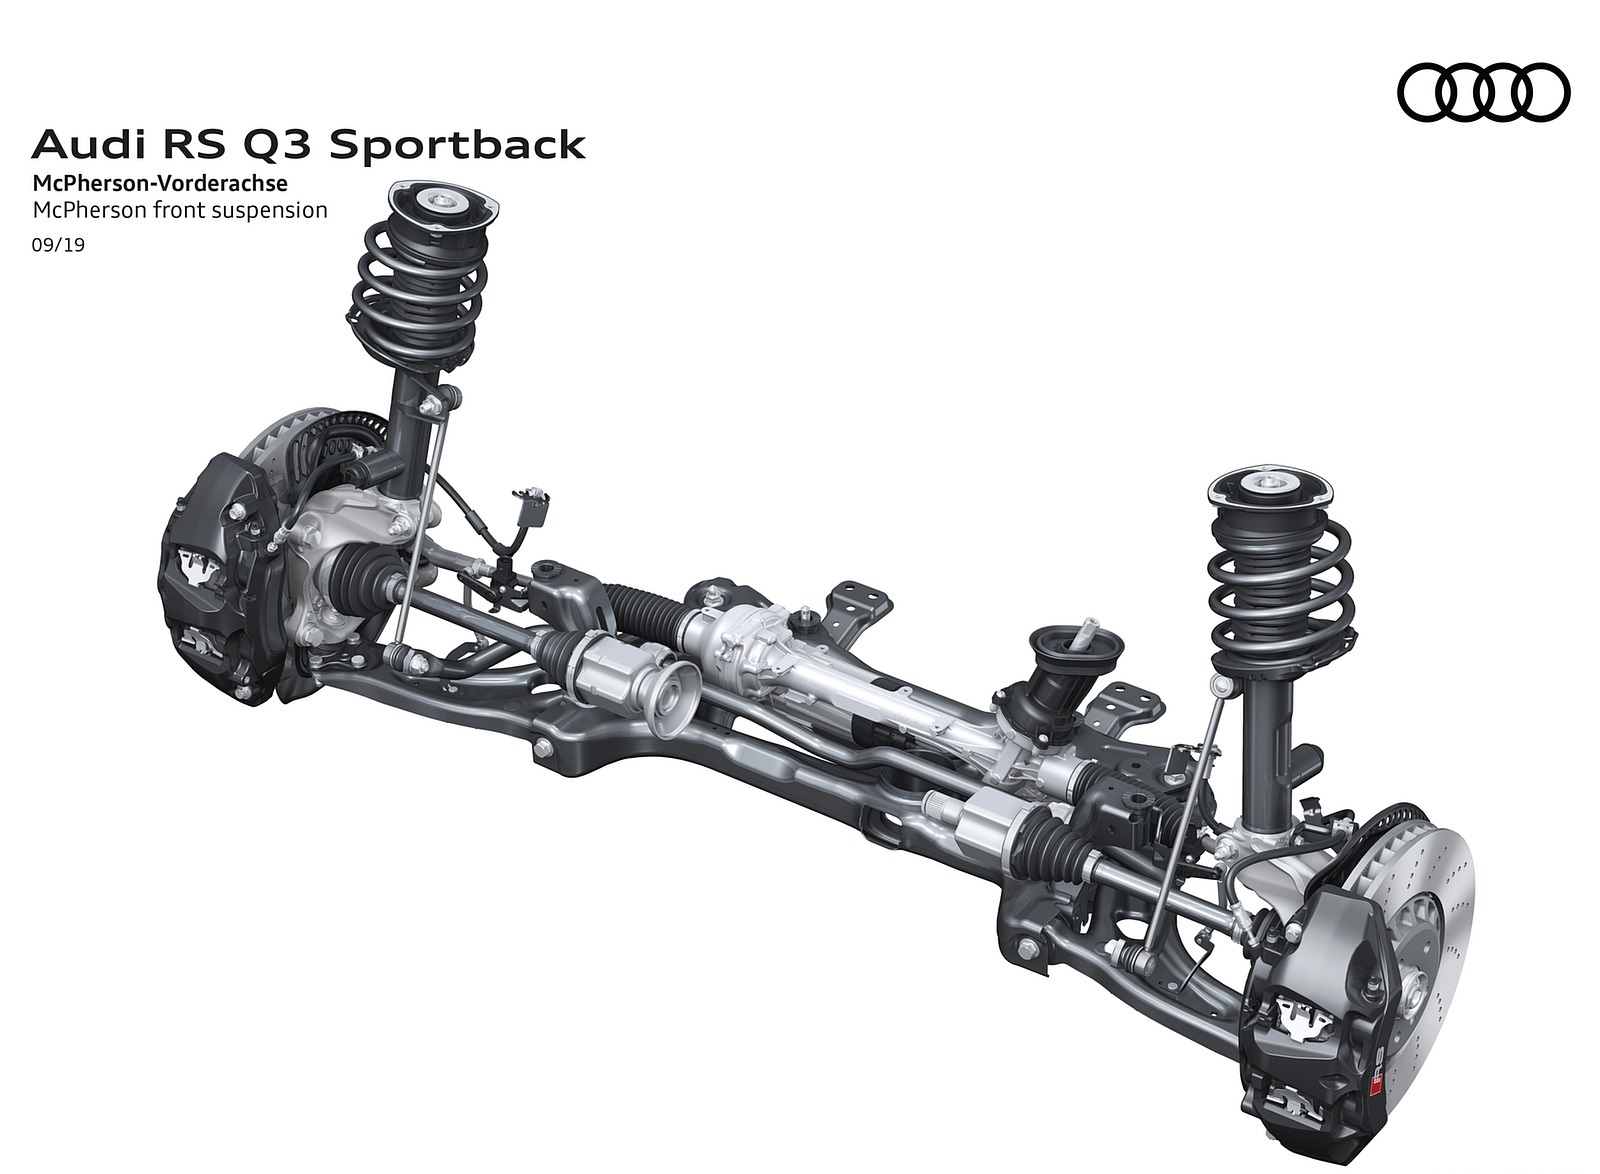 2020 Audi RS Q3 Sportback McPherson front suspension Wallpapers #121 of 127